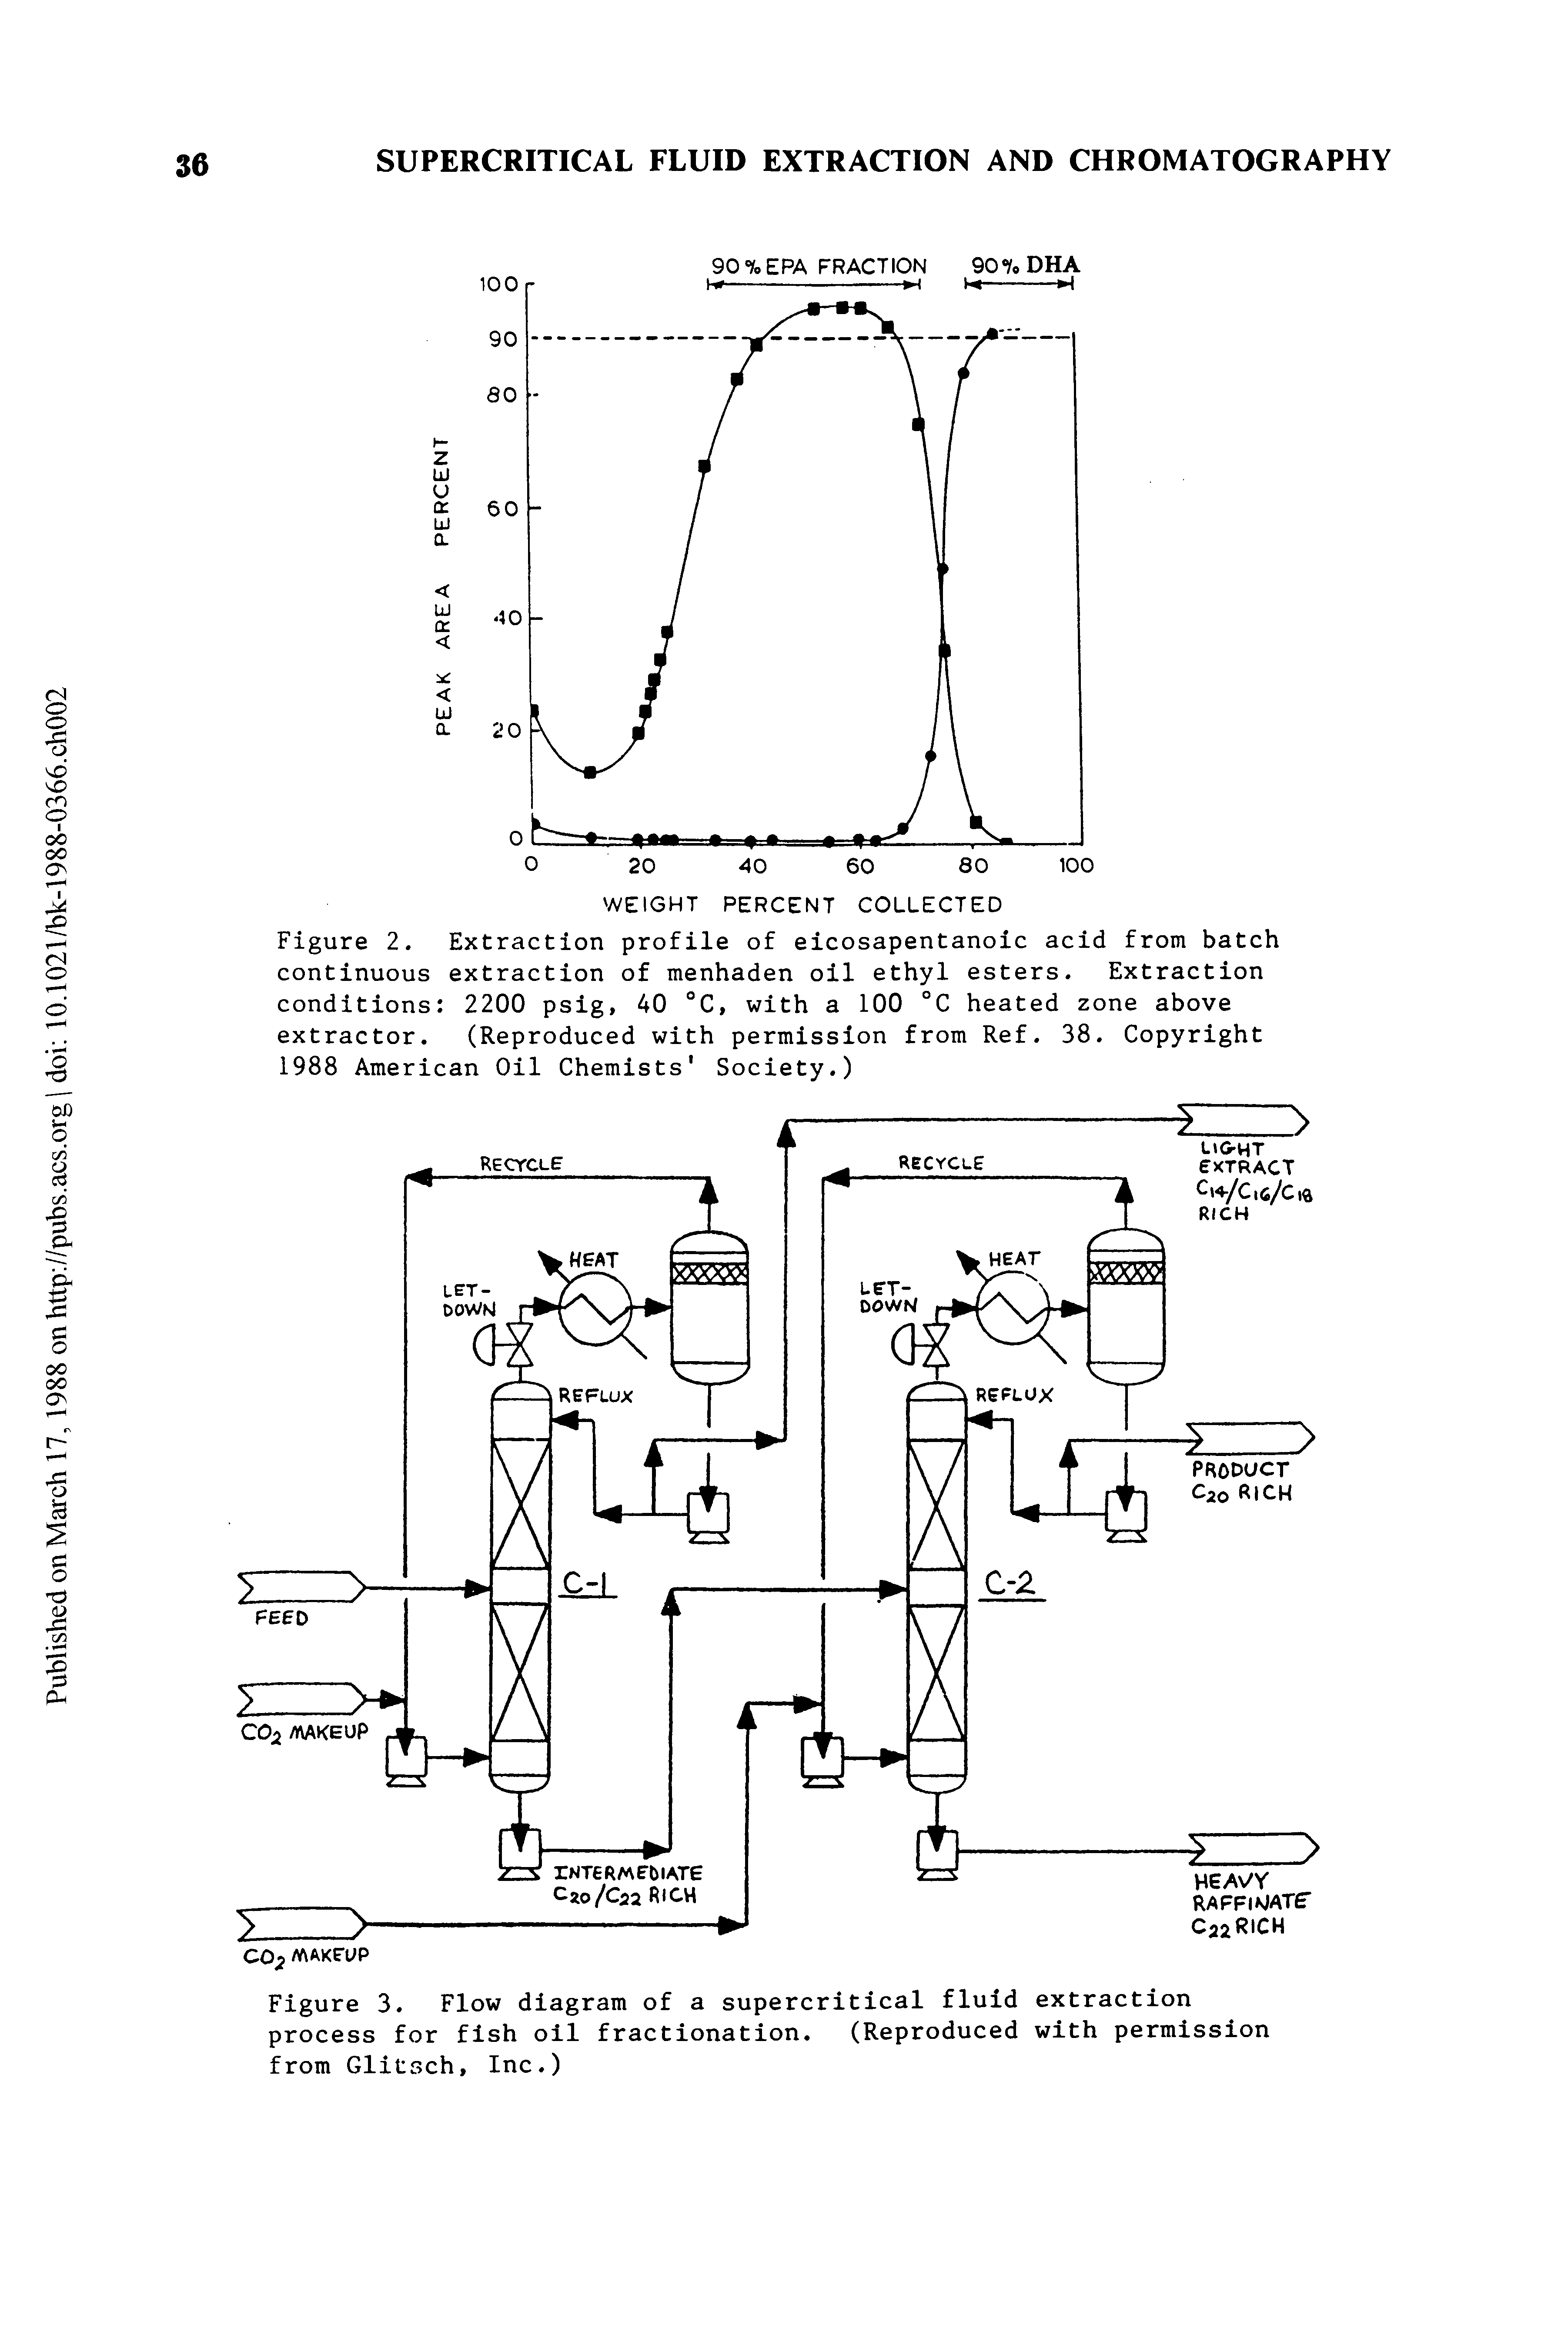 Figure 2. Extraction profile of eicosapentanoic acid from batch continuous extraction of menhaden oil ethyl esters. Extraction conditions 2200 psig, 40 °C, with a 100 °C heated zone above extractor. (Reproduced with permission from Ref. 38. Copyright 1988 American Oil Chemists Society.)...